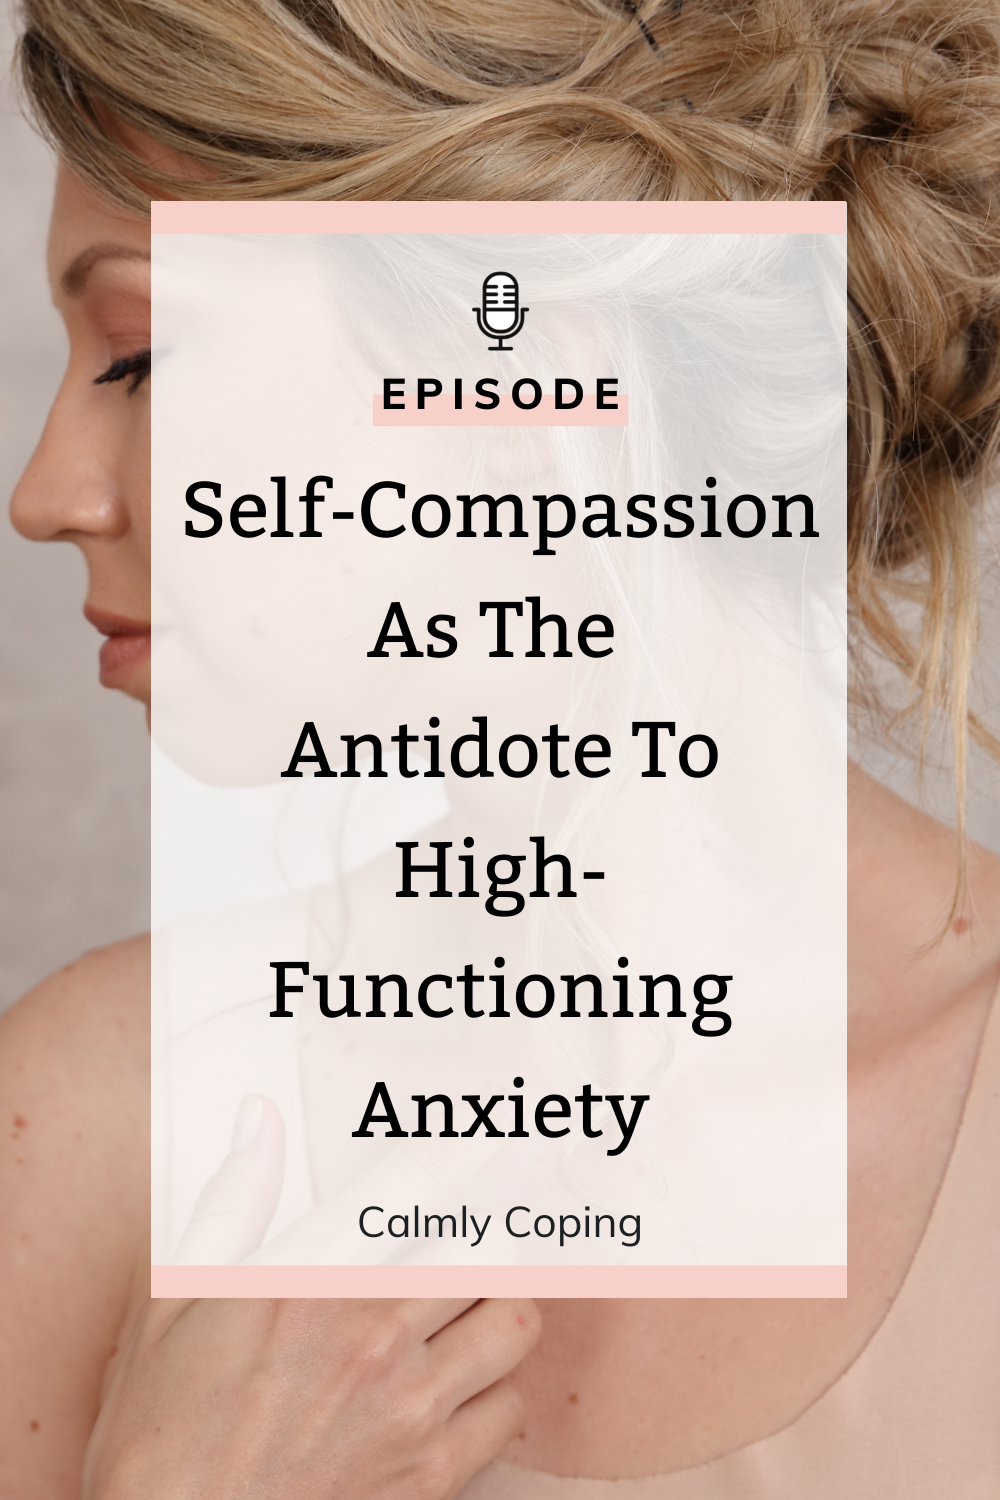 Self-Compassion As The Antidote To High-Functioning Anxiety